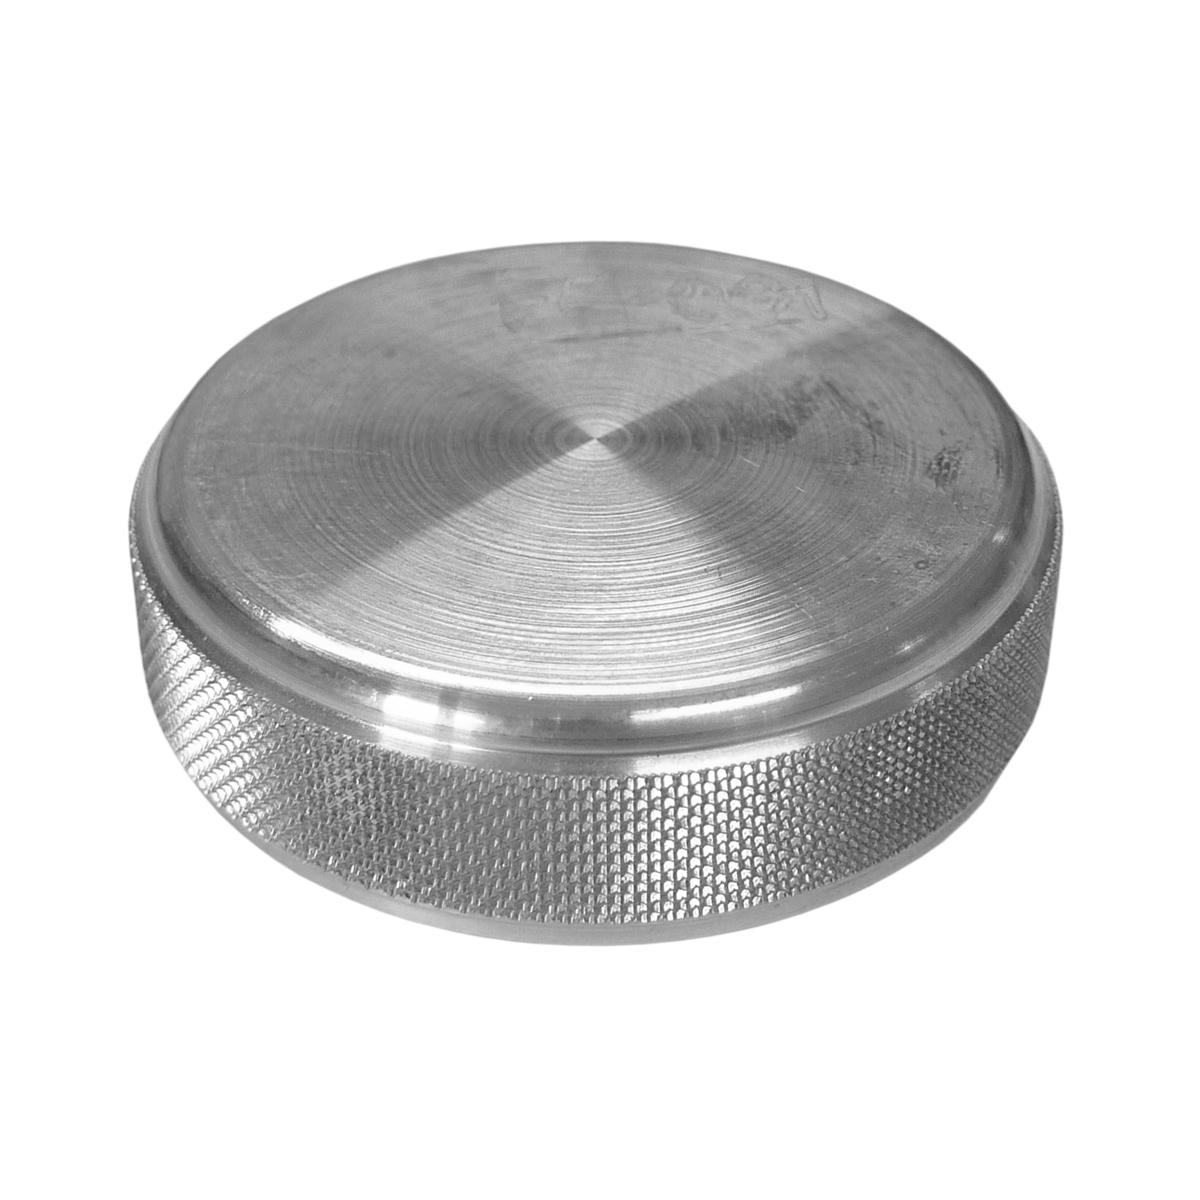 Knurled 45mm (1.75 Inch) Alloy Screw Cap Only